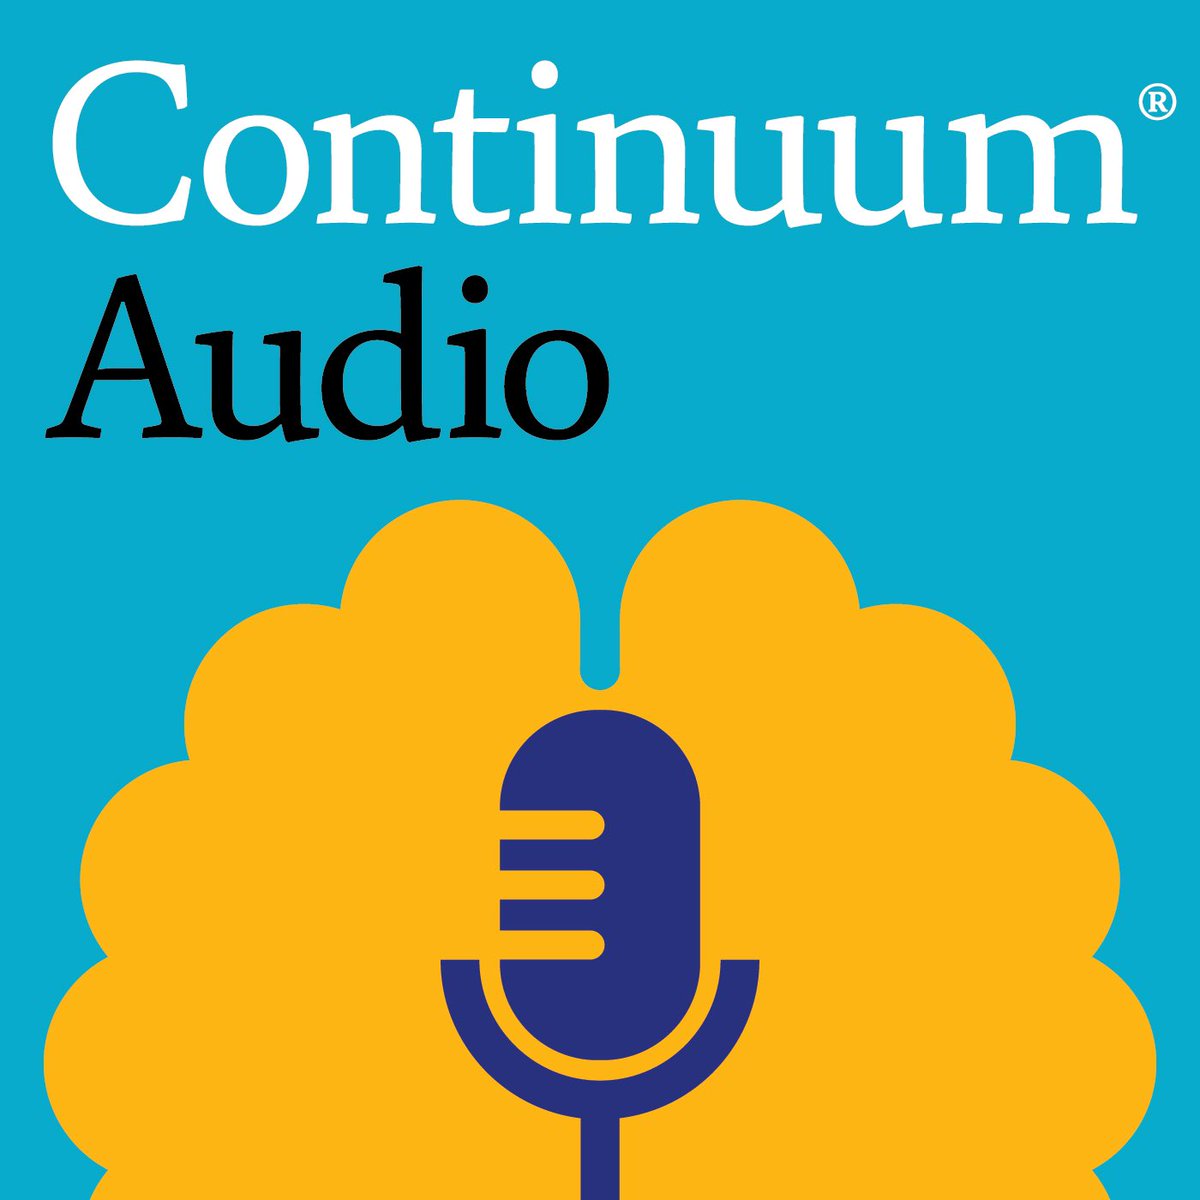 It’s here! Continuum Audio is now available FREE on Apple, Spotify and other podcast platforms. First podcasts out next week. Follow, rate, and review us! Trailer ⬇️ podcasts.apple.com/us/podcast/con…